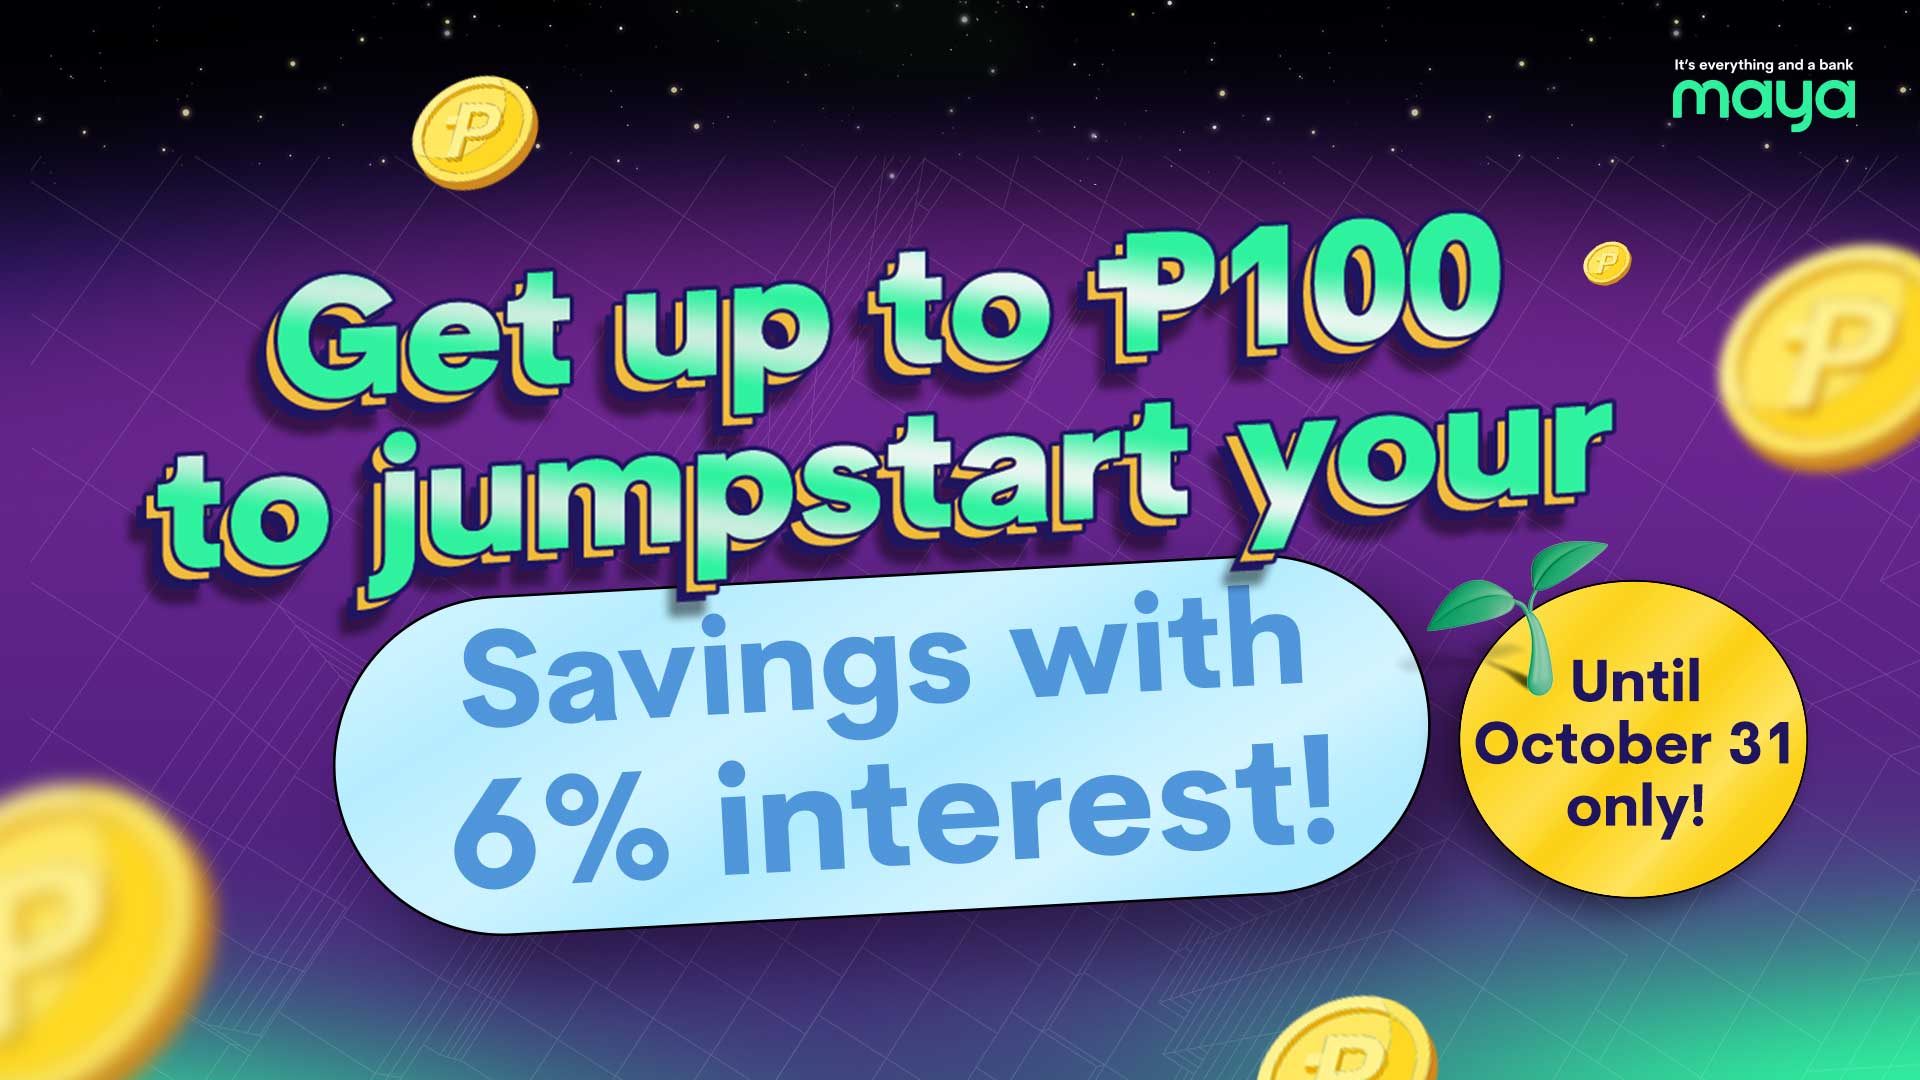 New User Exclusive: Get P100 when you sign up for Maya, deposit to 